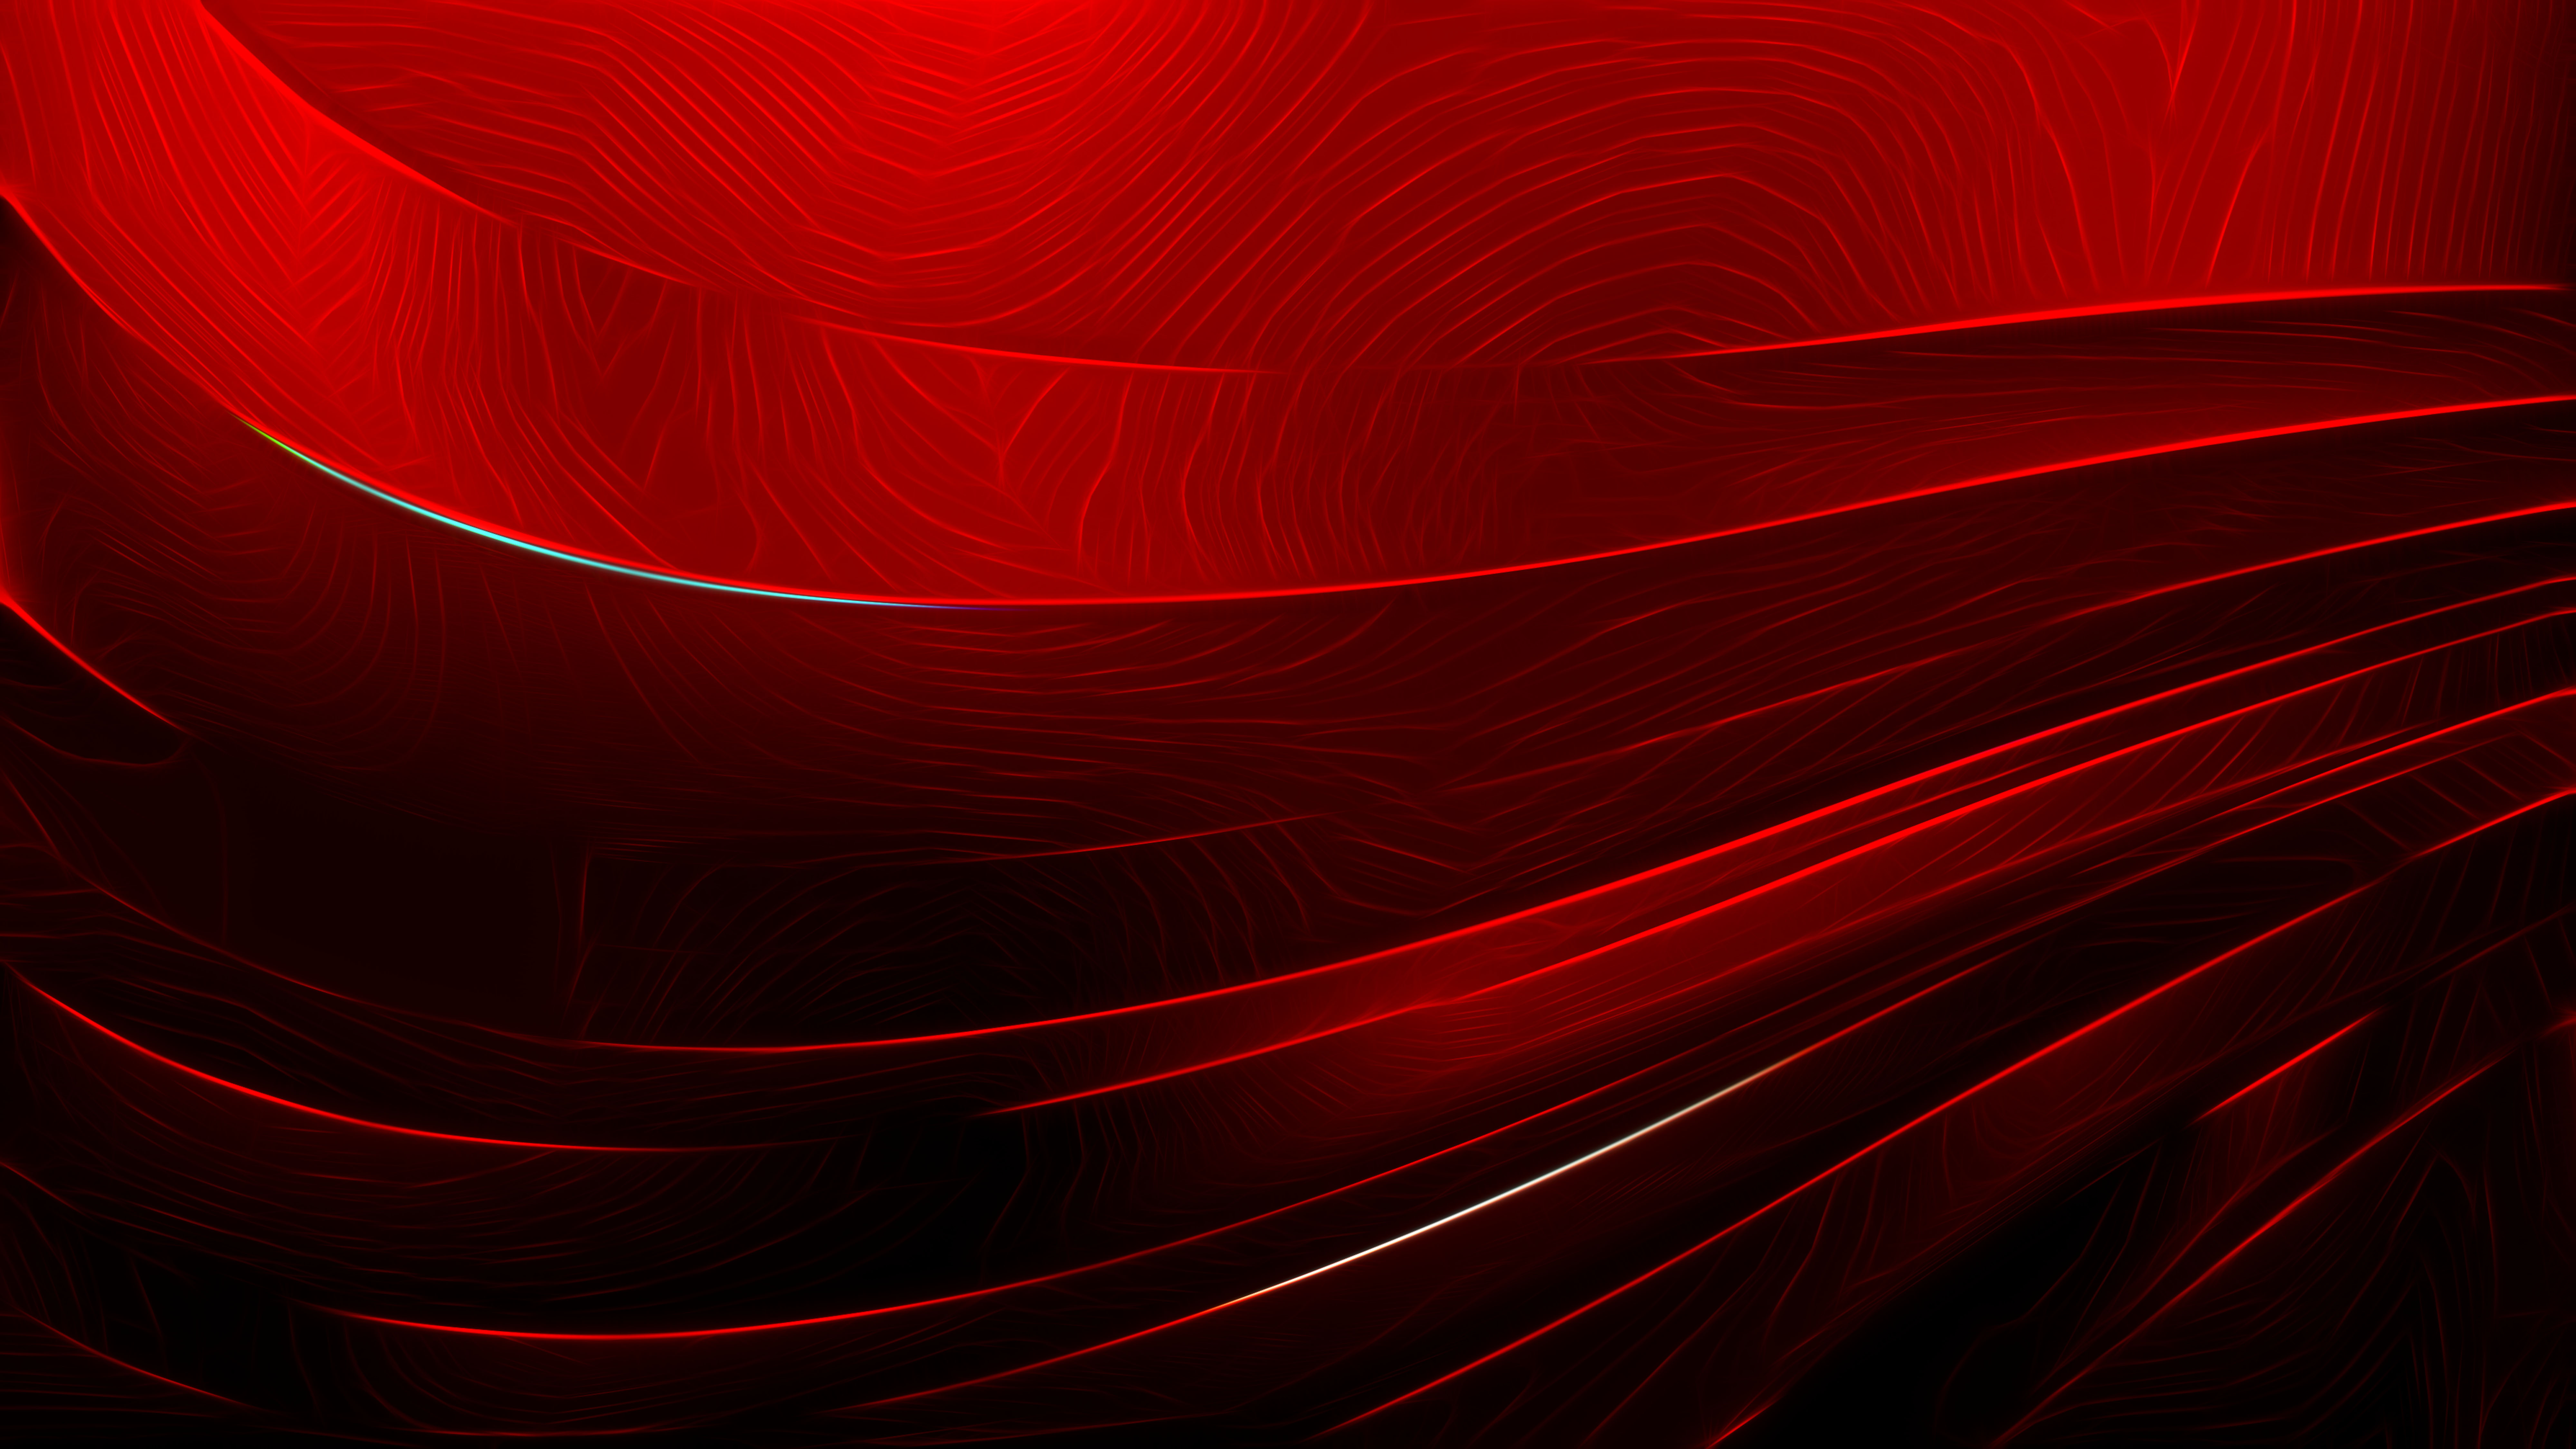 Details 100 royal red texture background - Abzlocal.mx